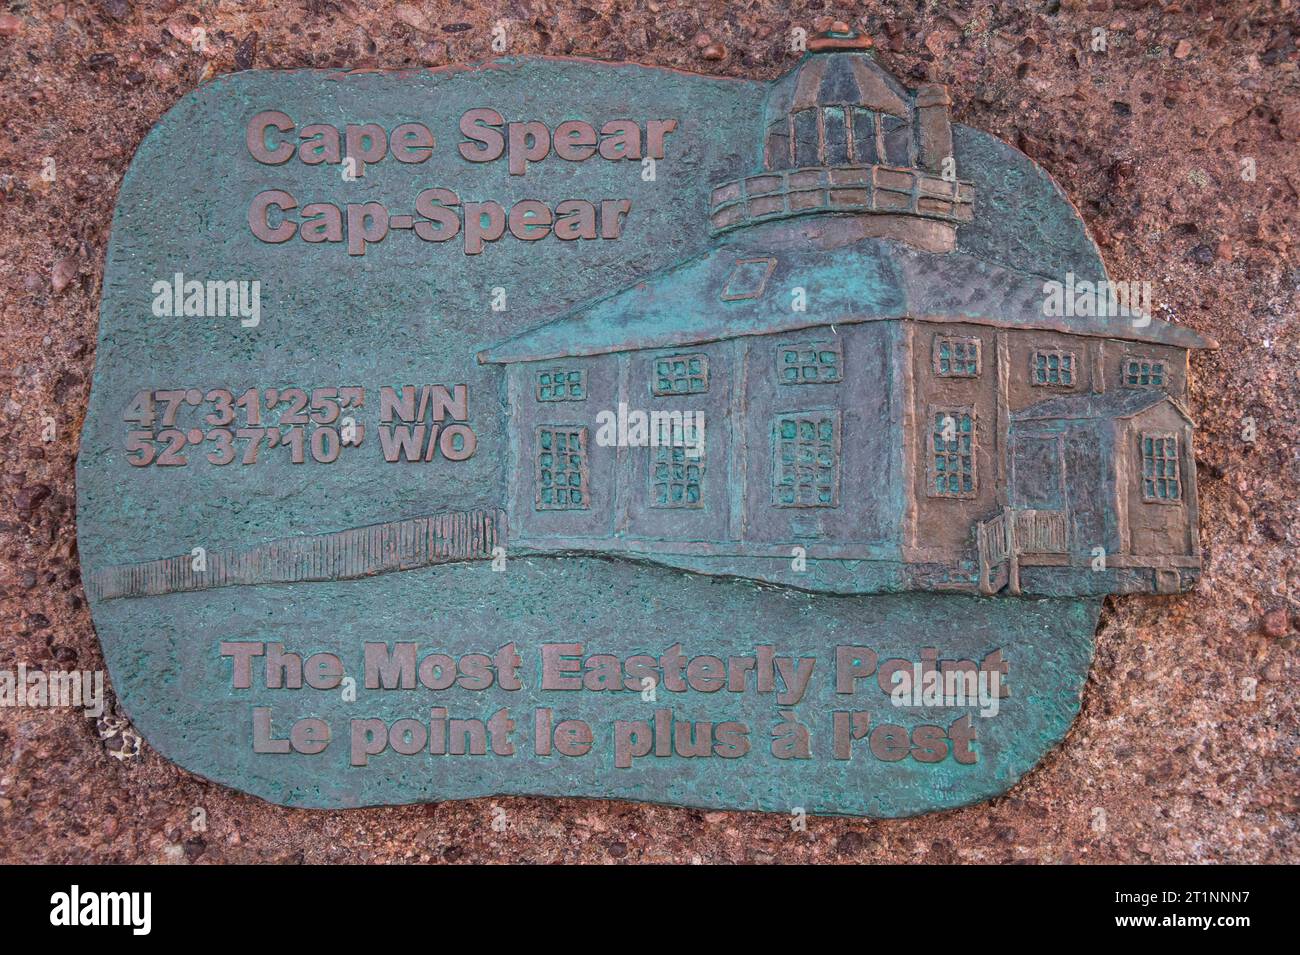 Most easterly point sign at Cape Spear National Historic Site in St. John's, Newfoundland & Labrador, Canada Stock Photo